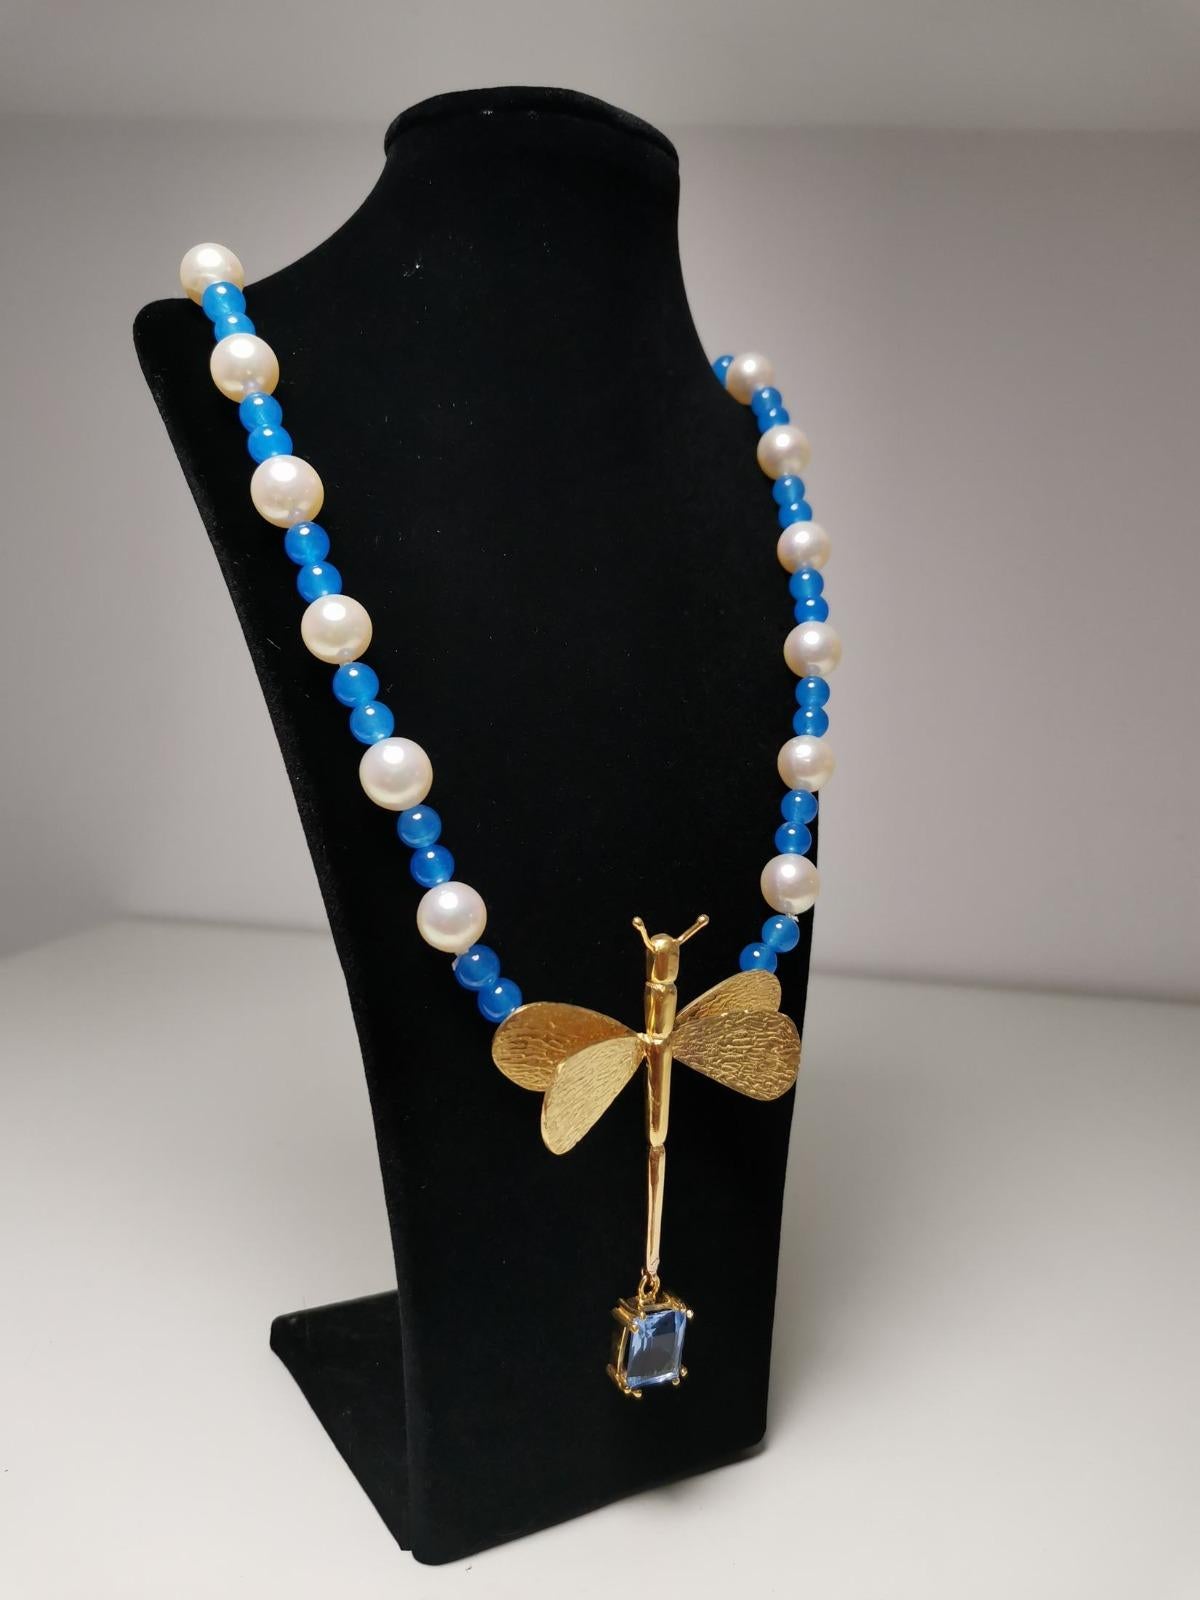 Necklace of Cultured Pearls, Extra Quality 'Akoya Japan' For Sale 4